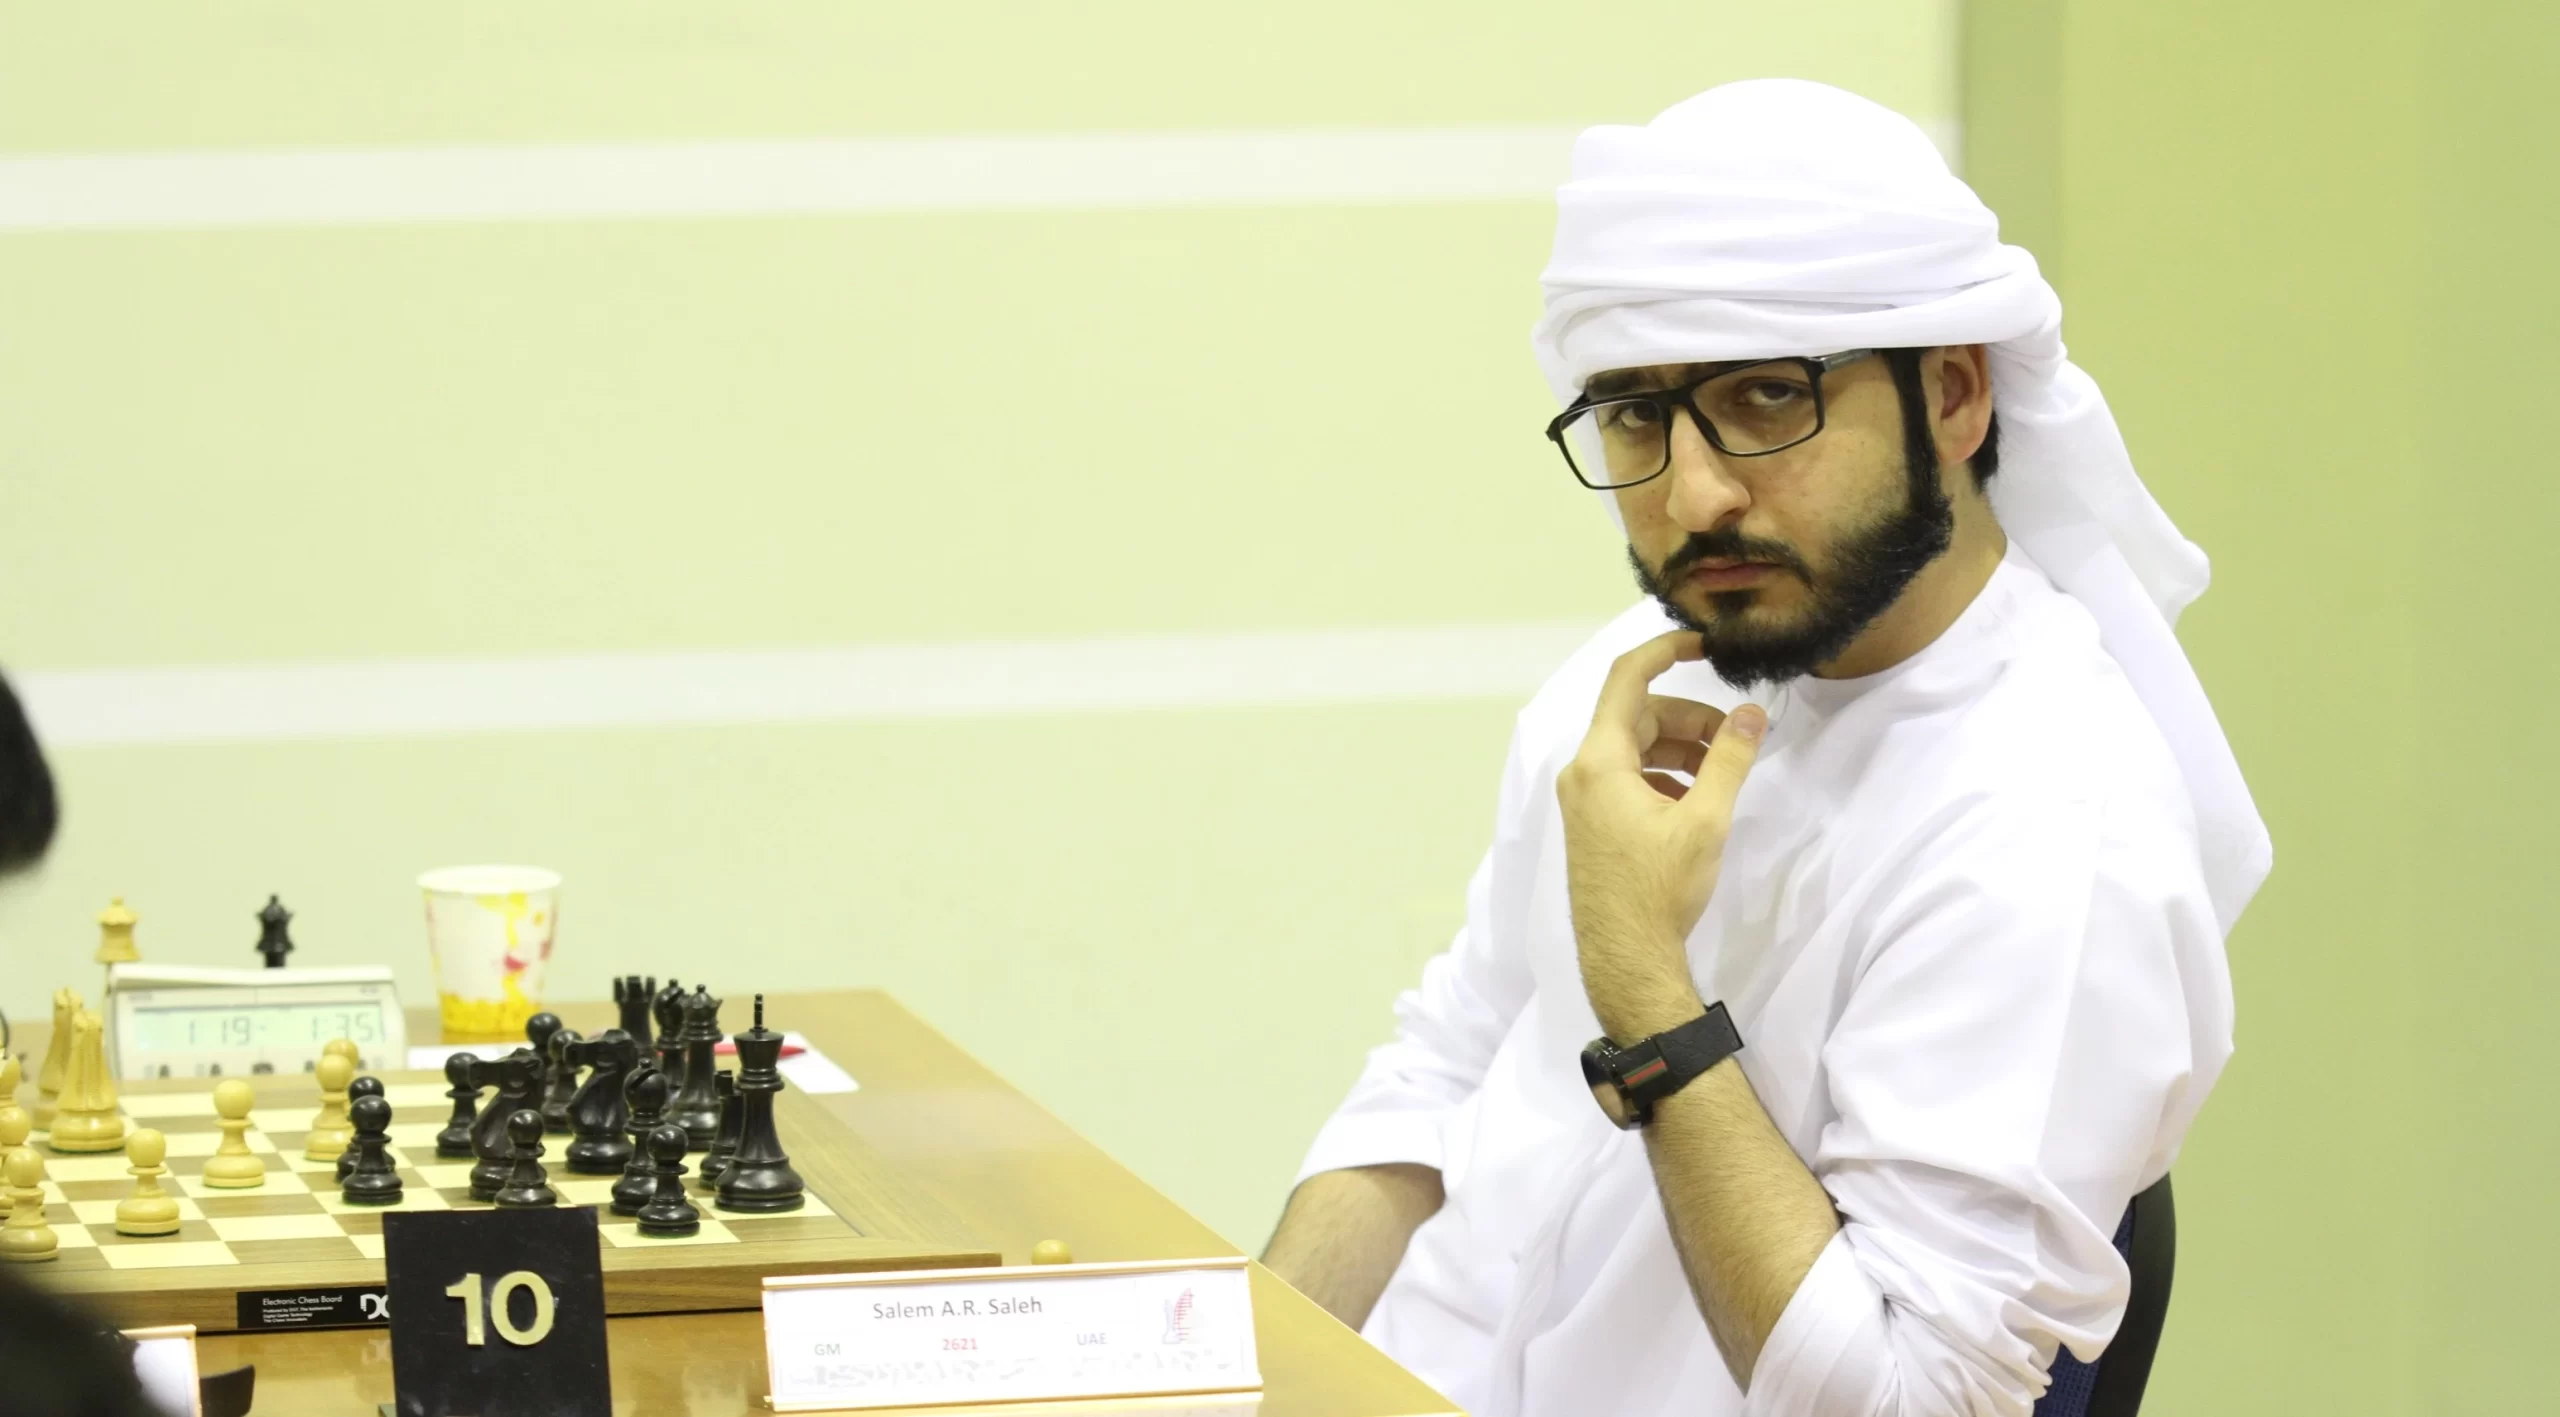 Sharjah Masters on X: Local hero GM Salem Saleh @GMSalem_AR wins a crazy  game against Hans Niemann and moves to 6/8 with one round to go. Replay the  game here:   /